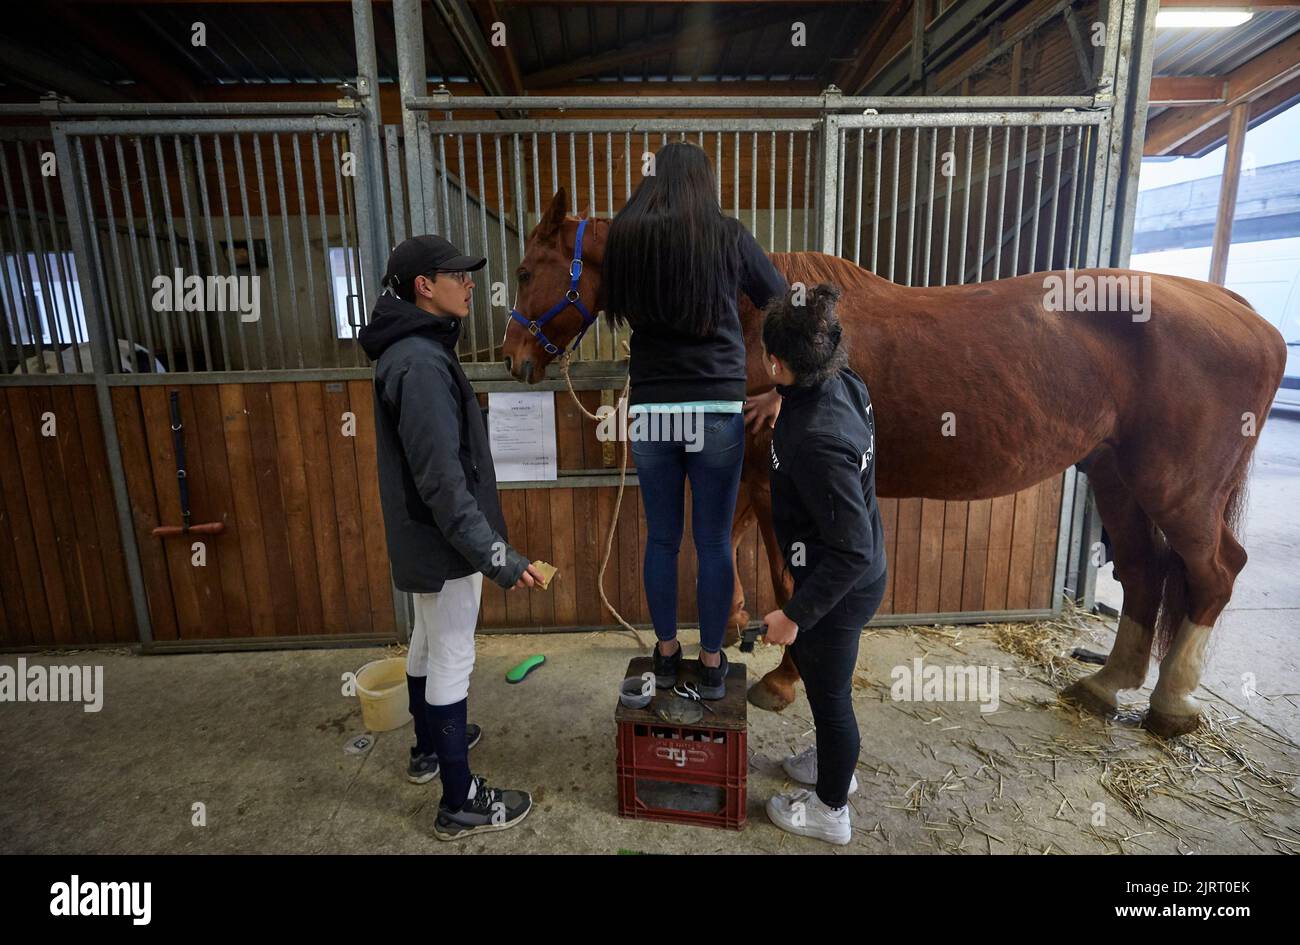 Lons-le-Saunier (central-eastern France), November 12, 2021: event called “Equilons”, amicable sale with horses and ponies at the equestrian center an Stock Photo